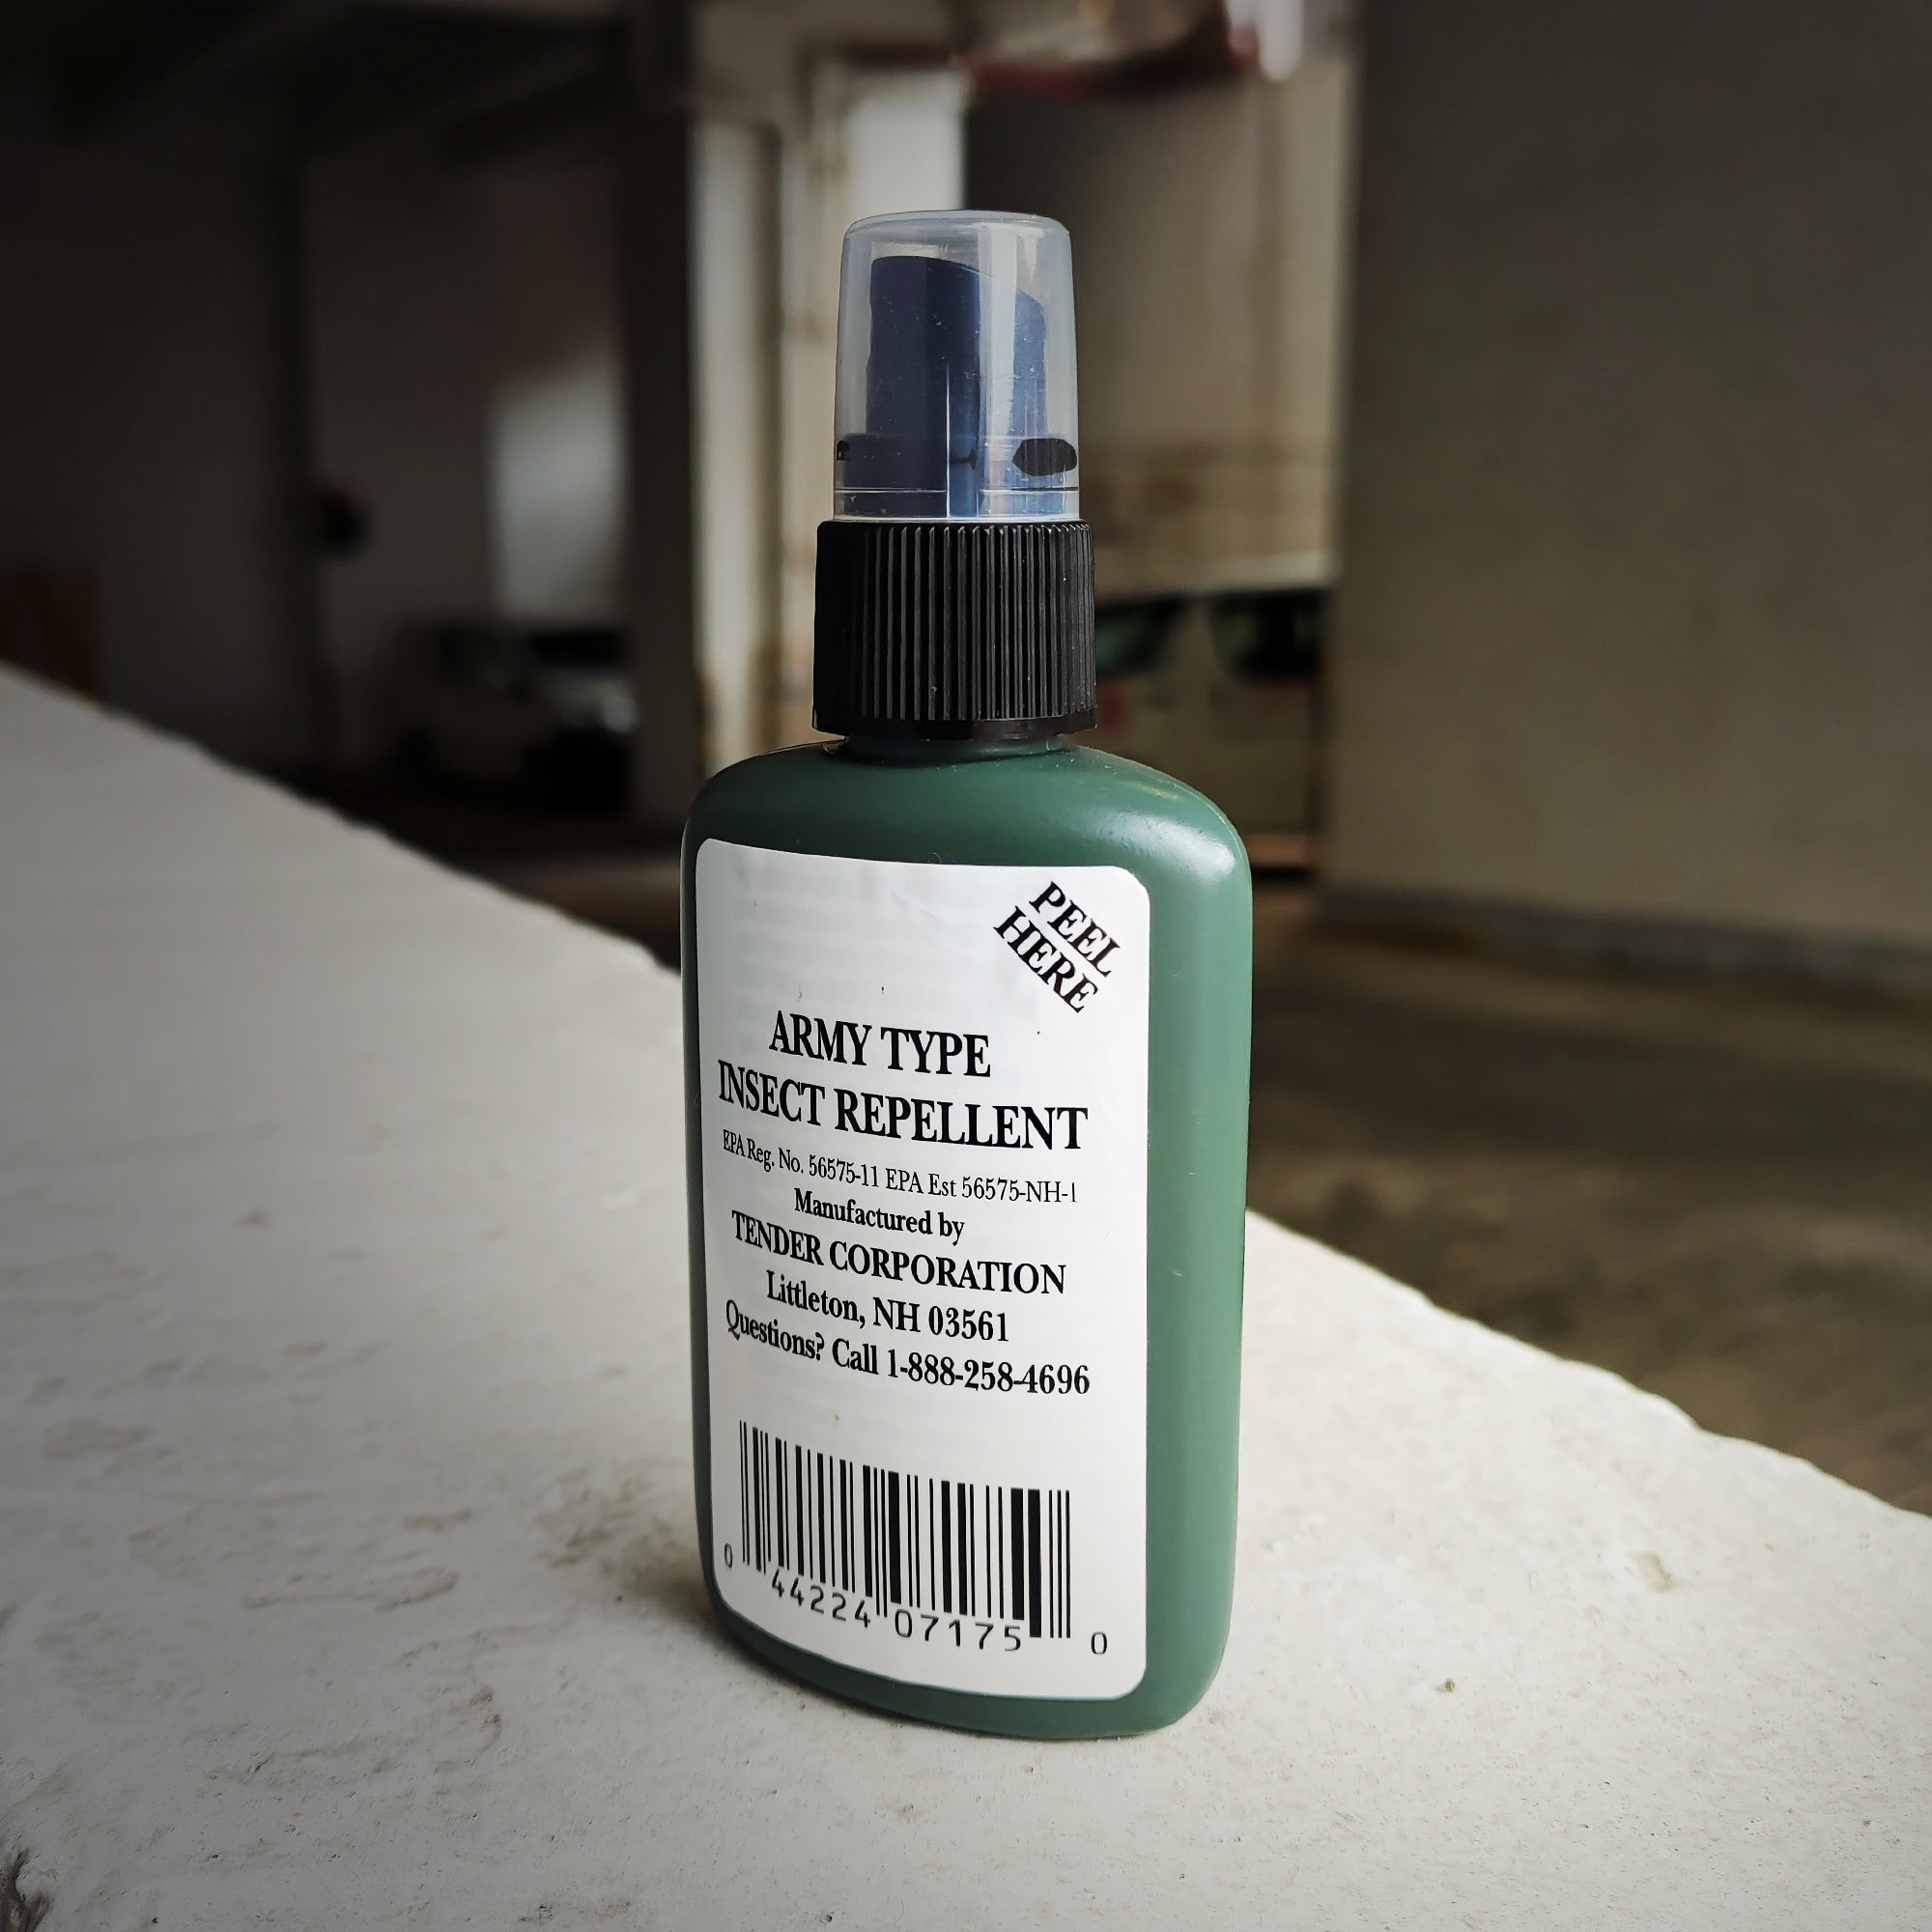 U.S. Army Type Insect Repellent | HK Military and Tactical | 3army